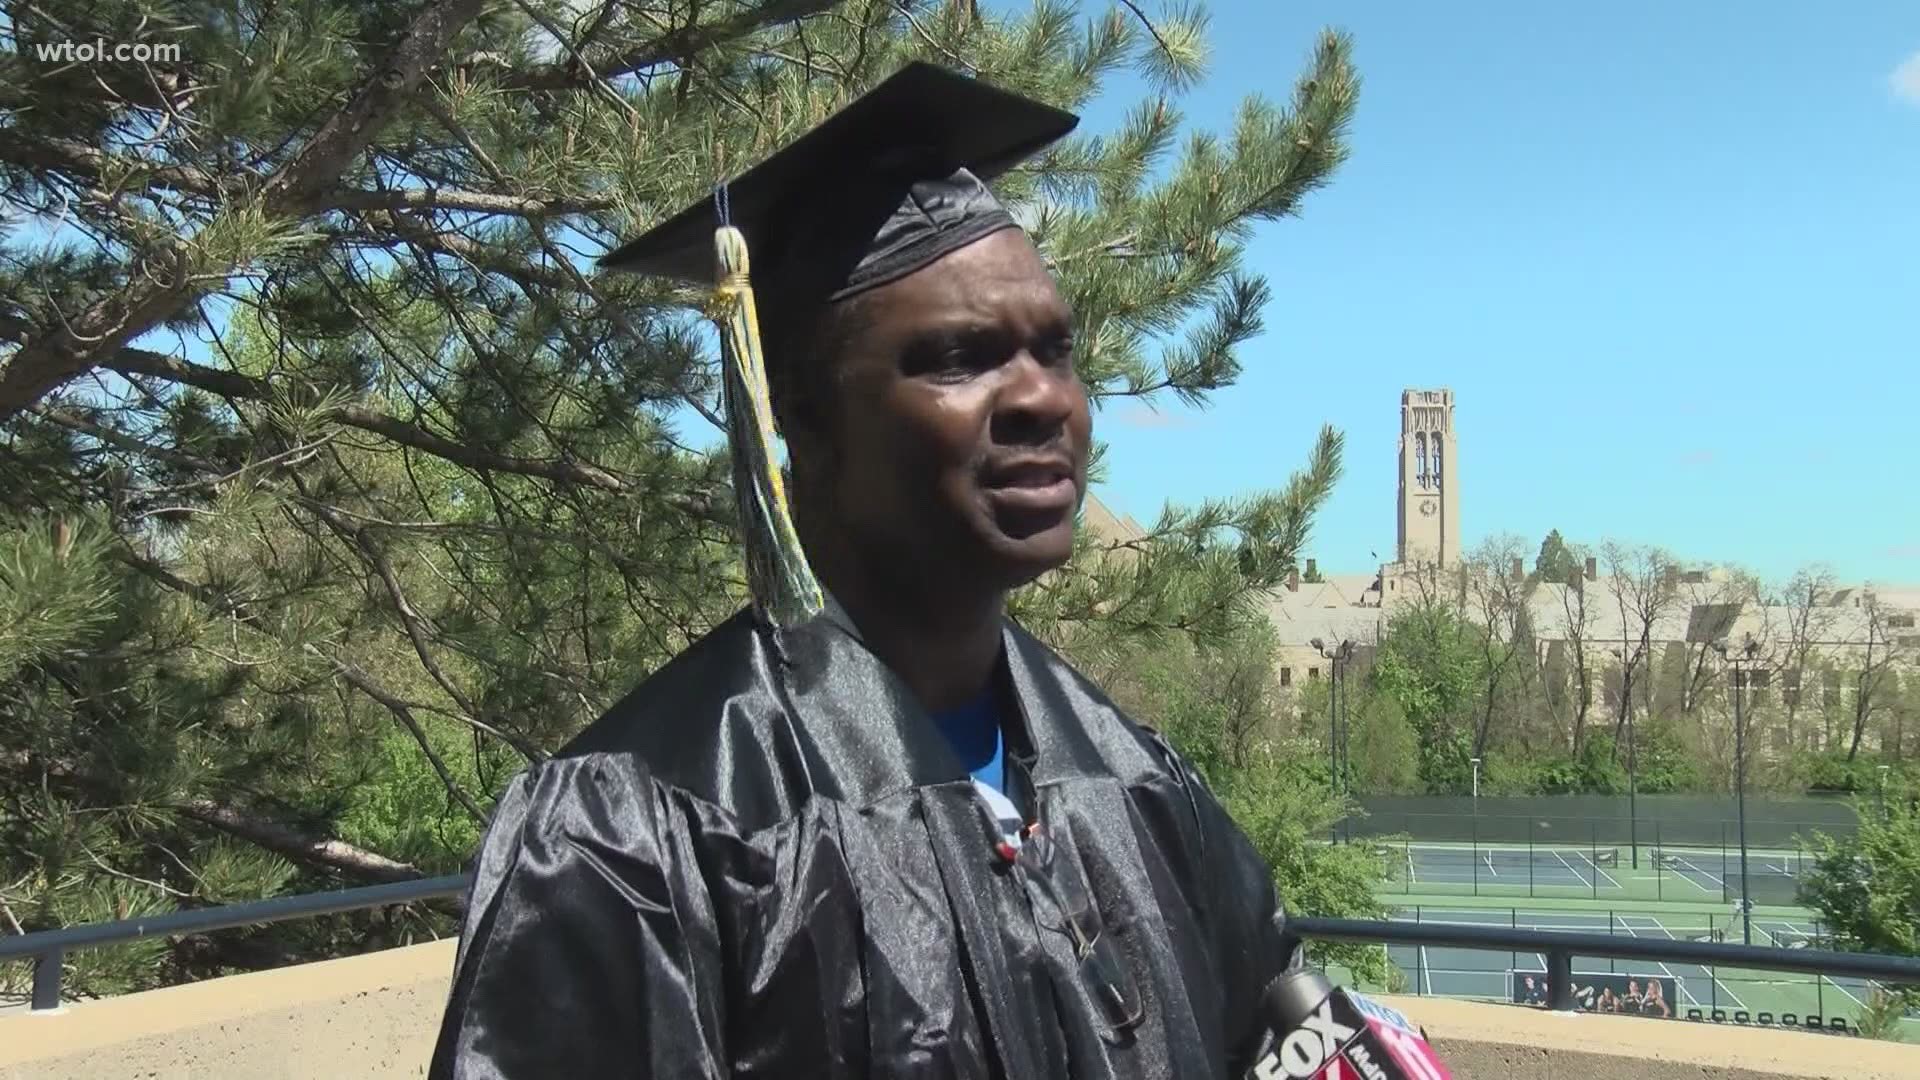 Hundreds of college graduates walked across the stage at UToledo commencement, but for one man it was a life-long dream. He went from life in prison to college grad.